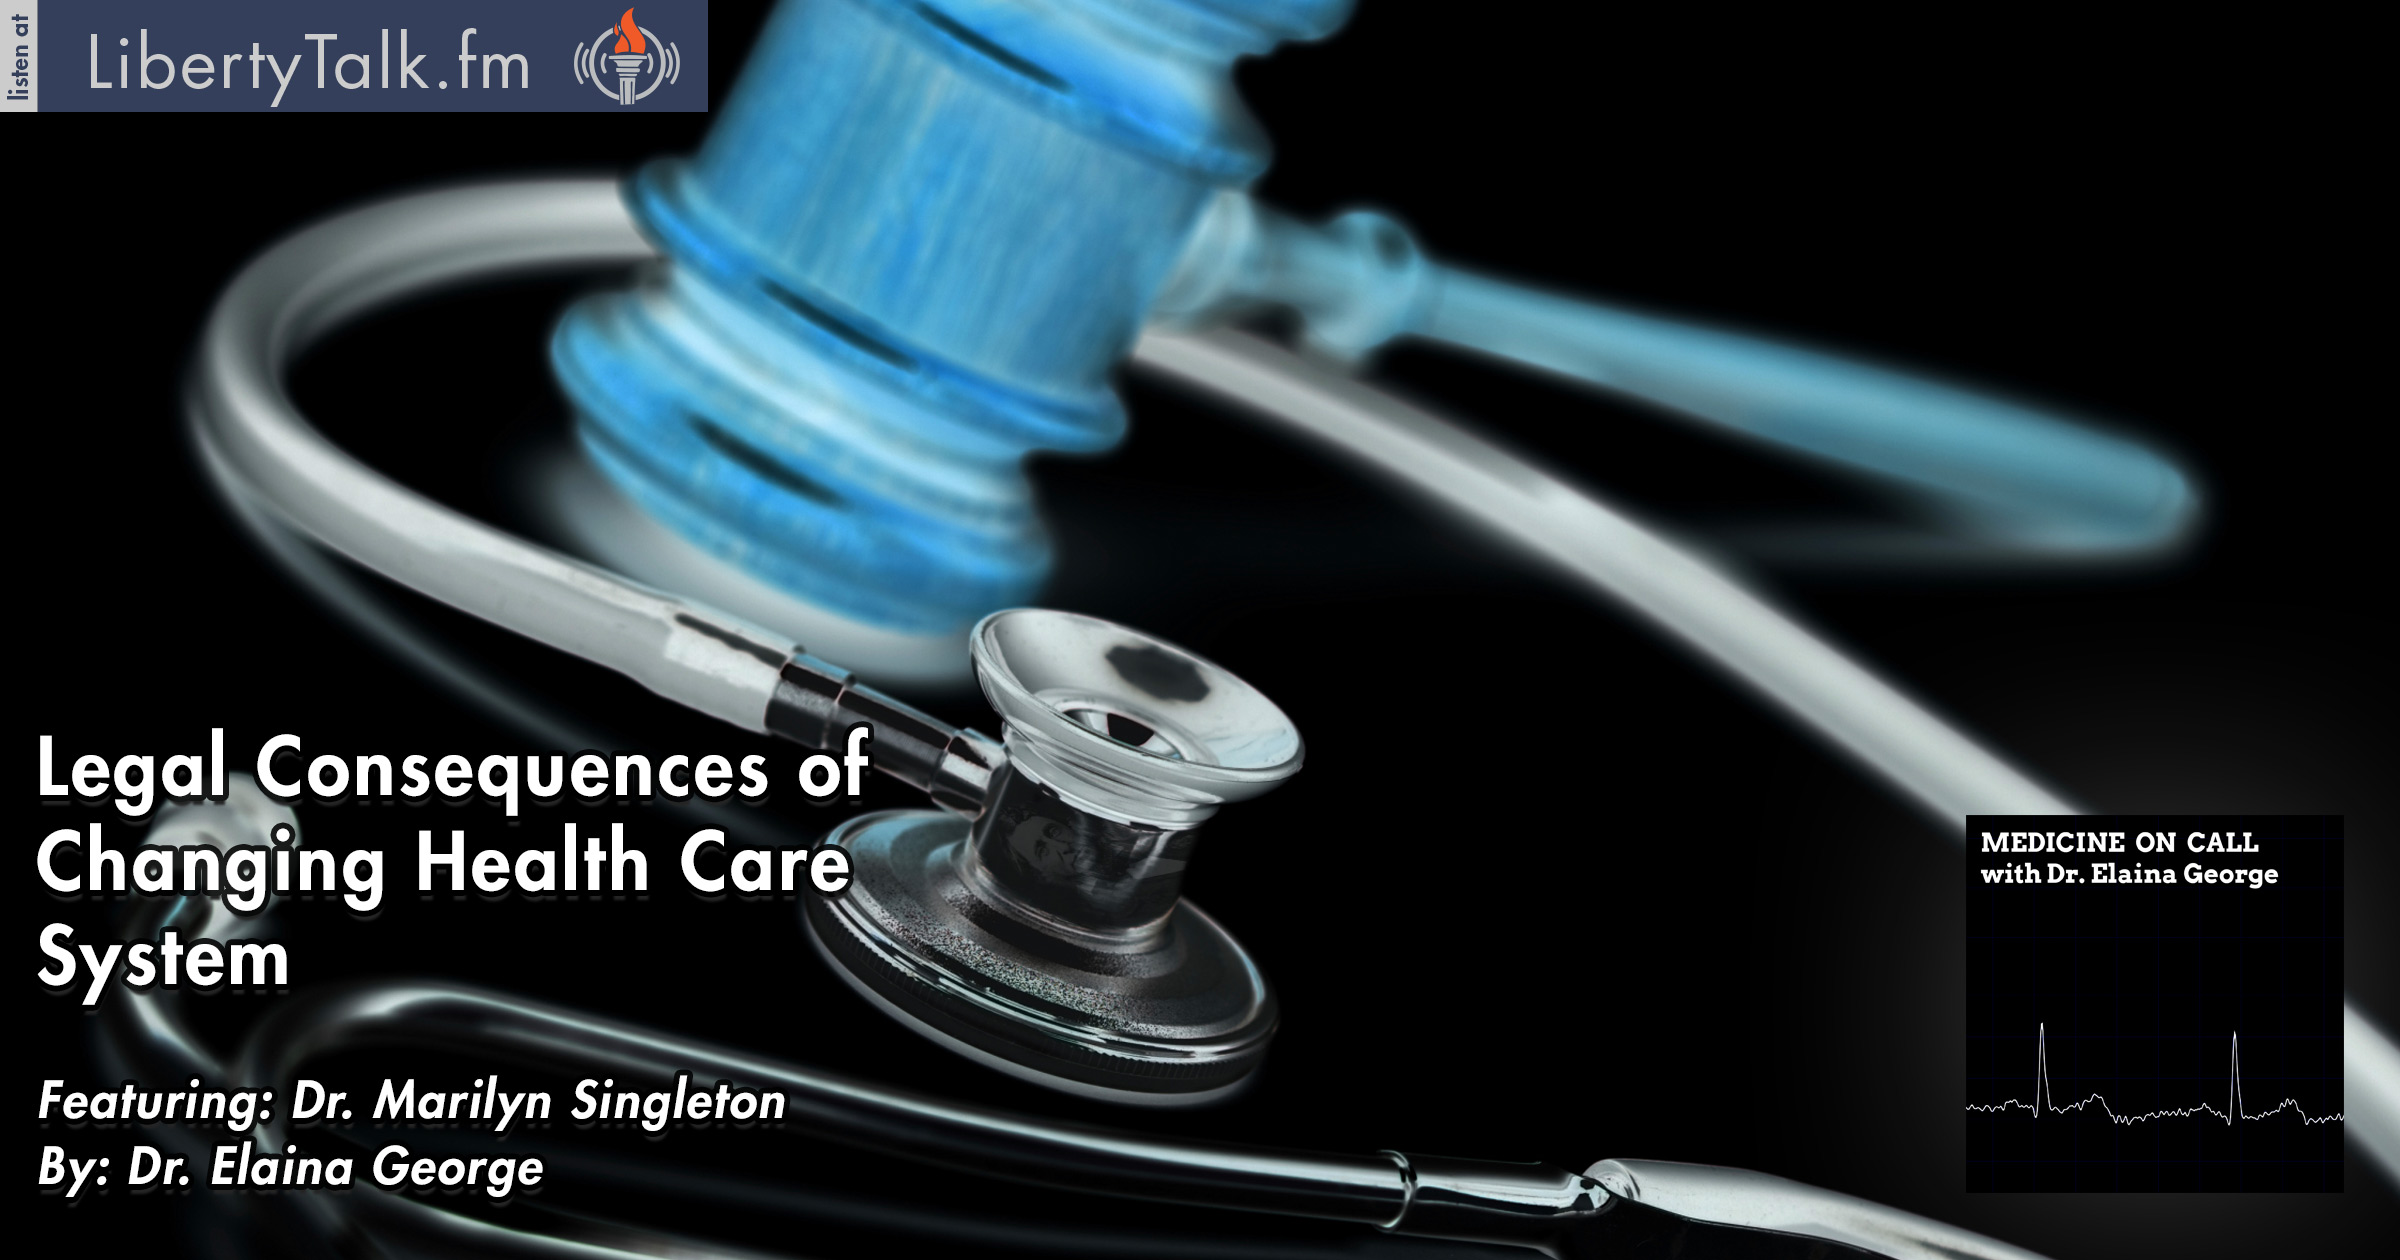 Health care system and legal consequences